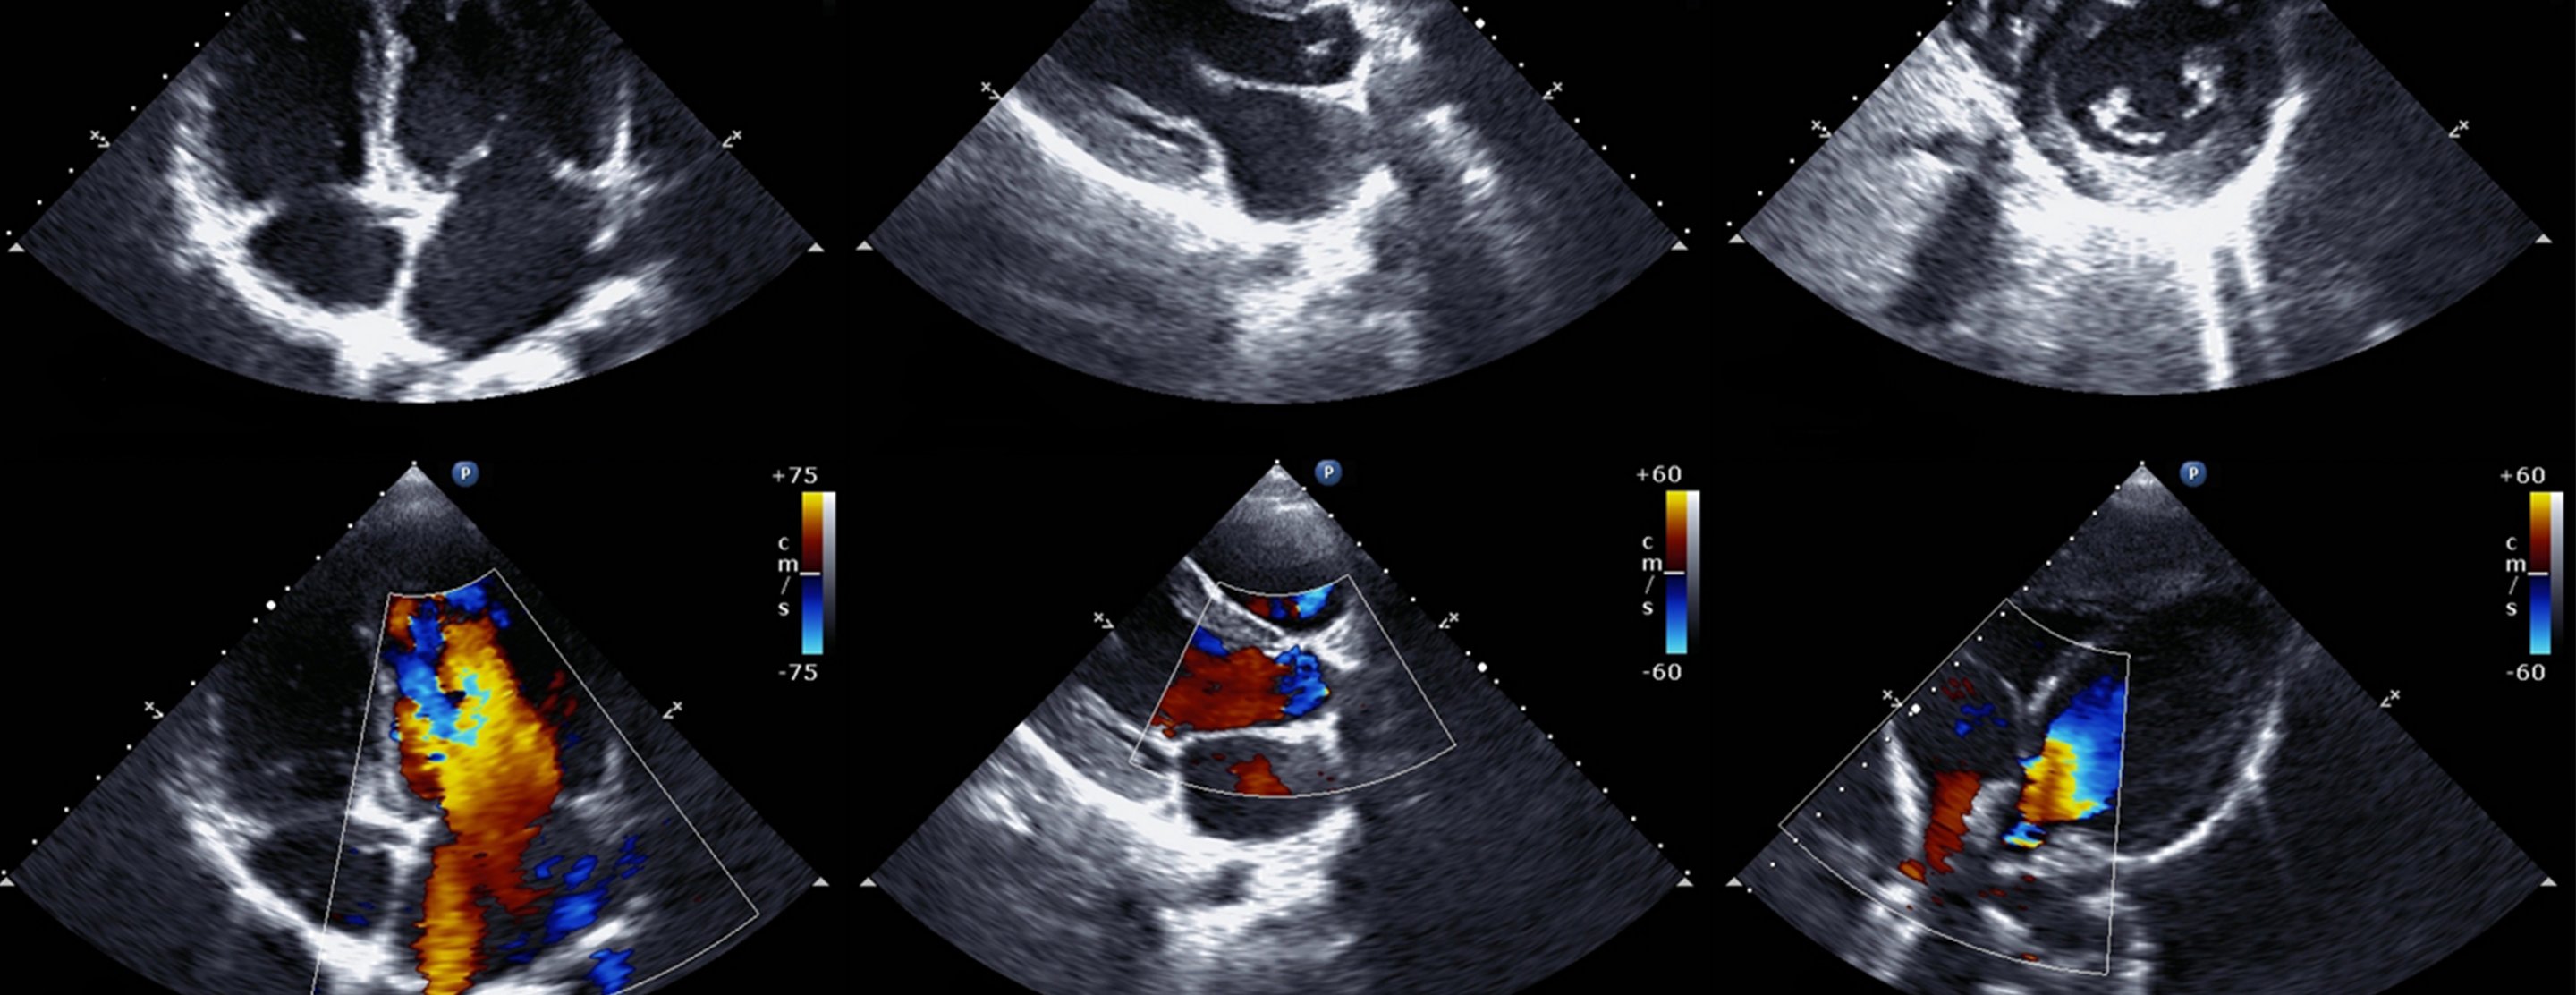 how long are echocardiogram results good for?